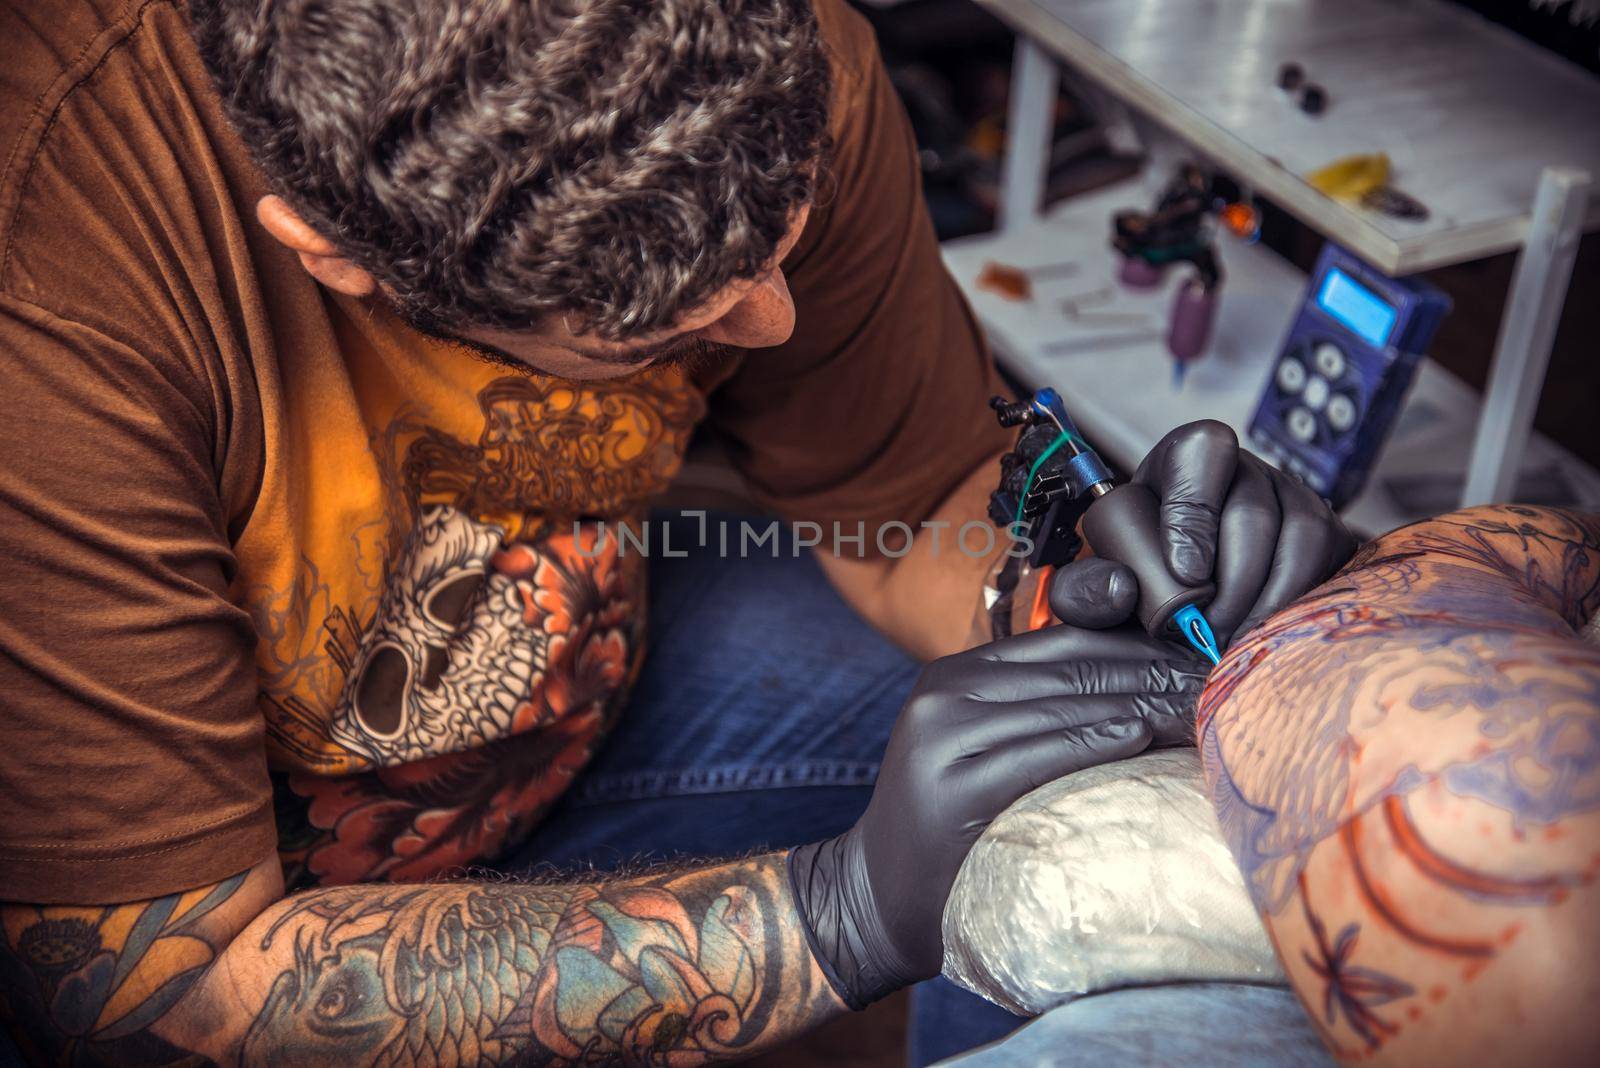 Tattoo master showing process of making a tattoo in tattoo parlor by Proff